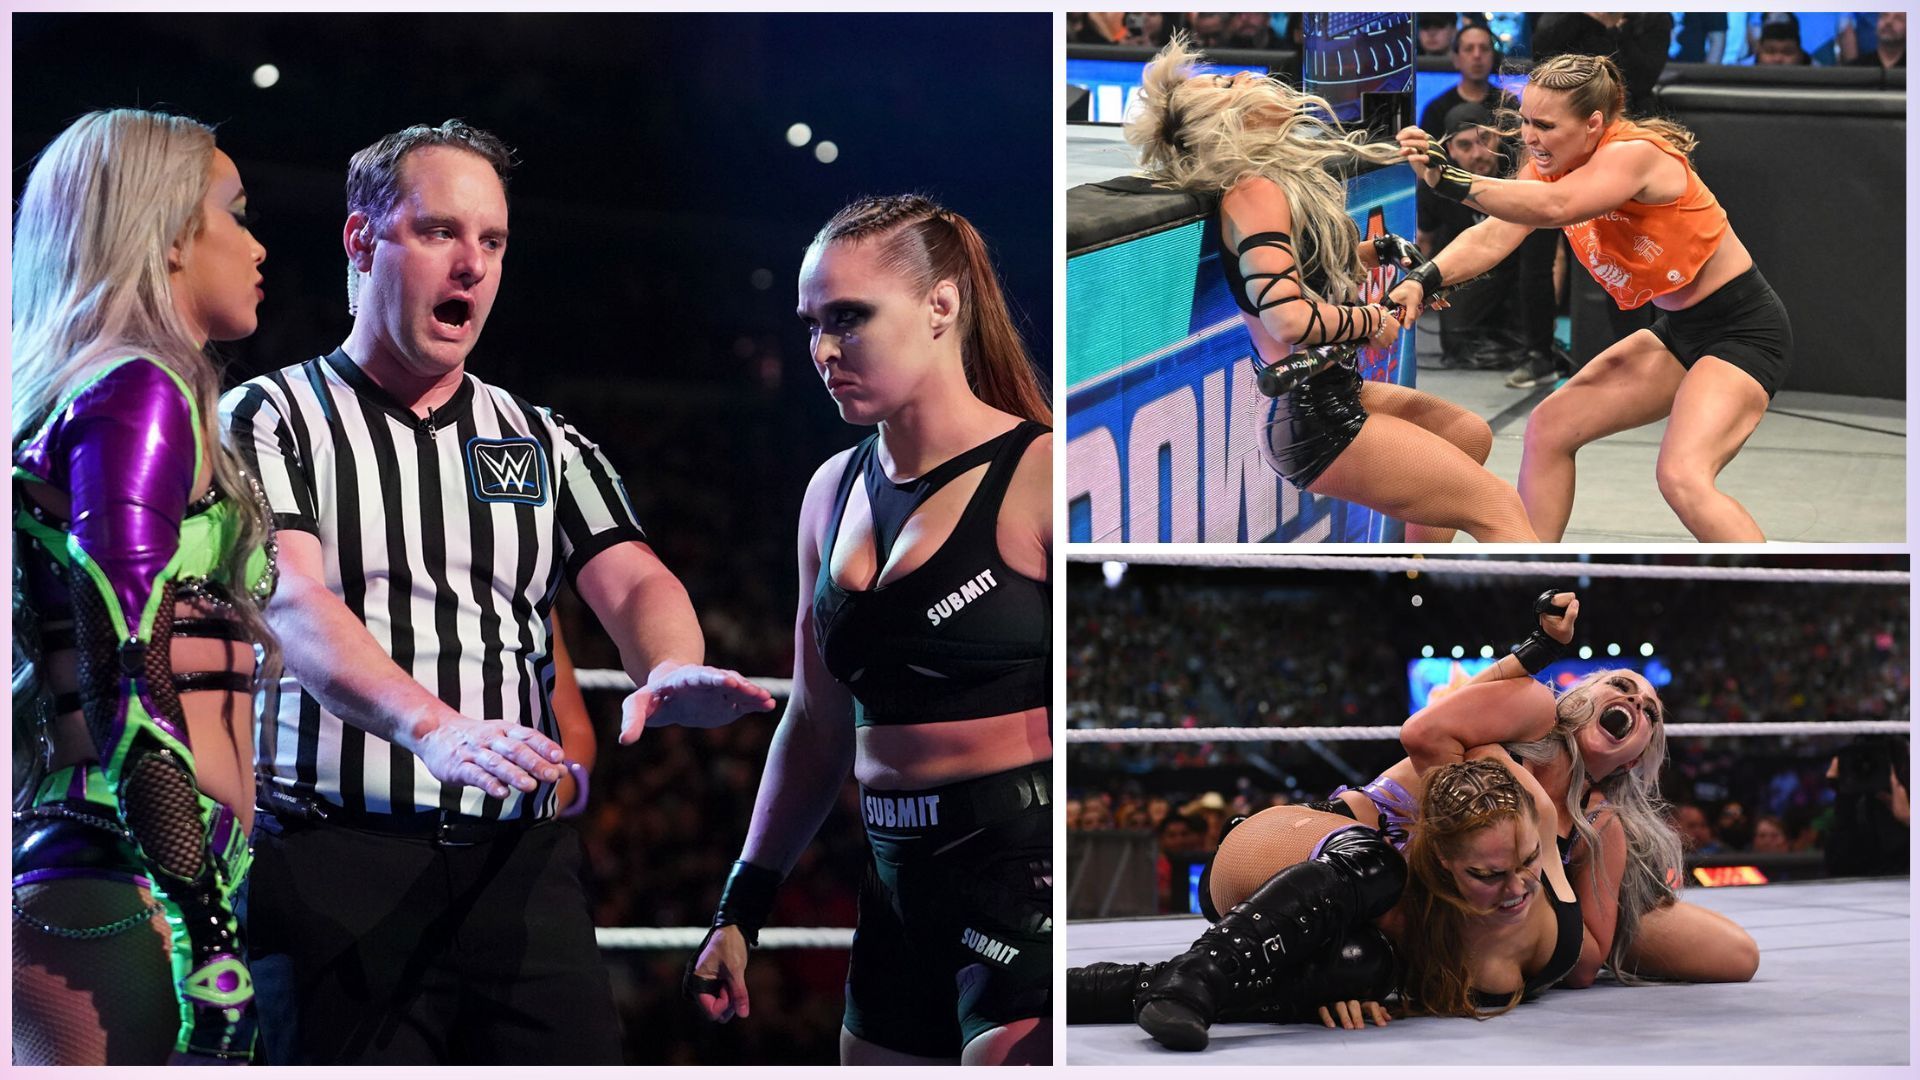 Liv Morgan and Ronda Rousey were involved in a heated rivalry.